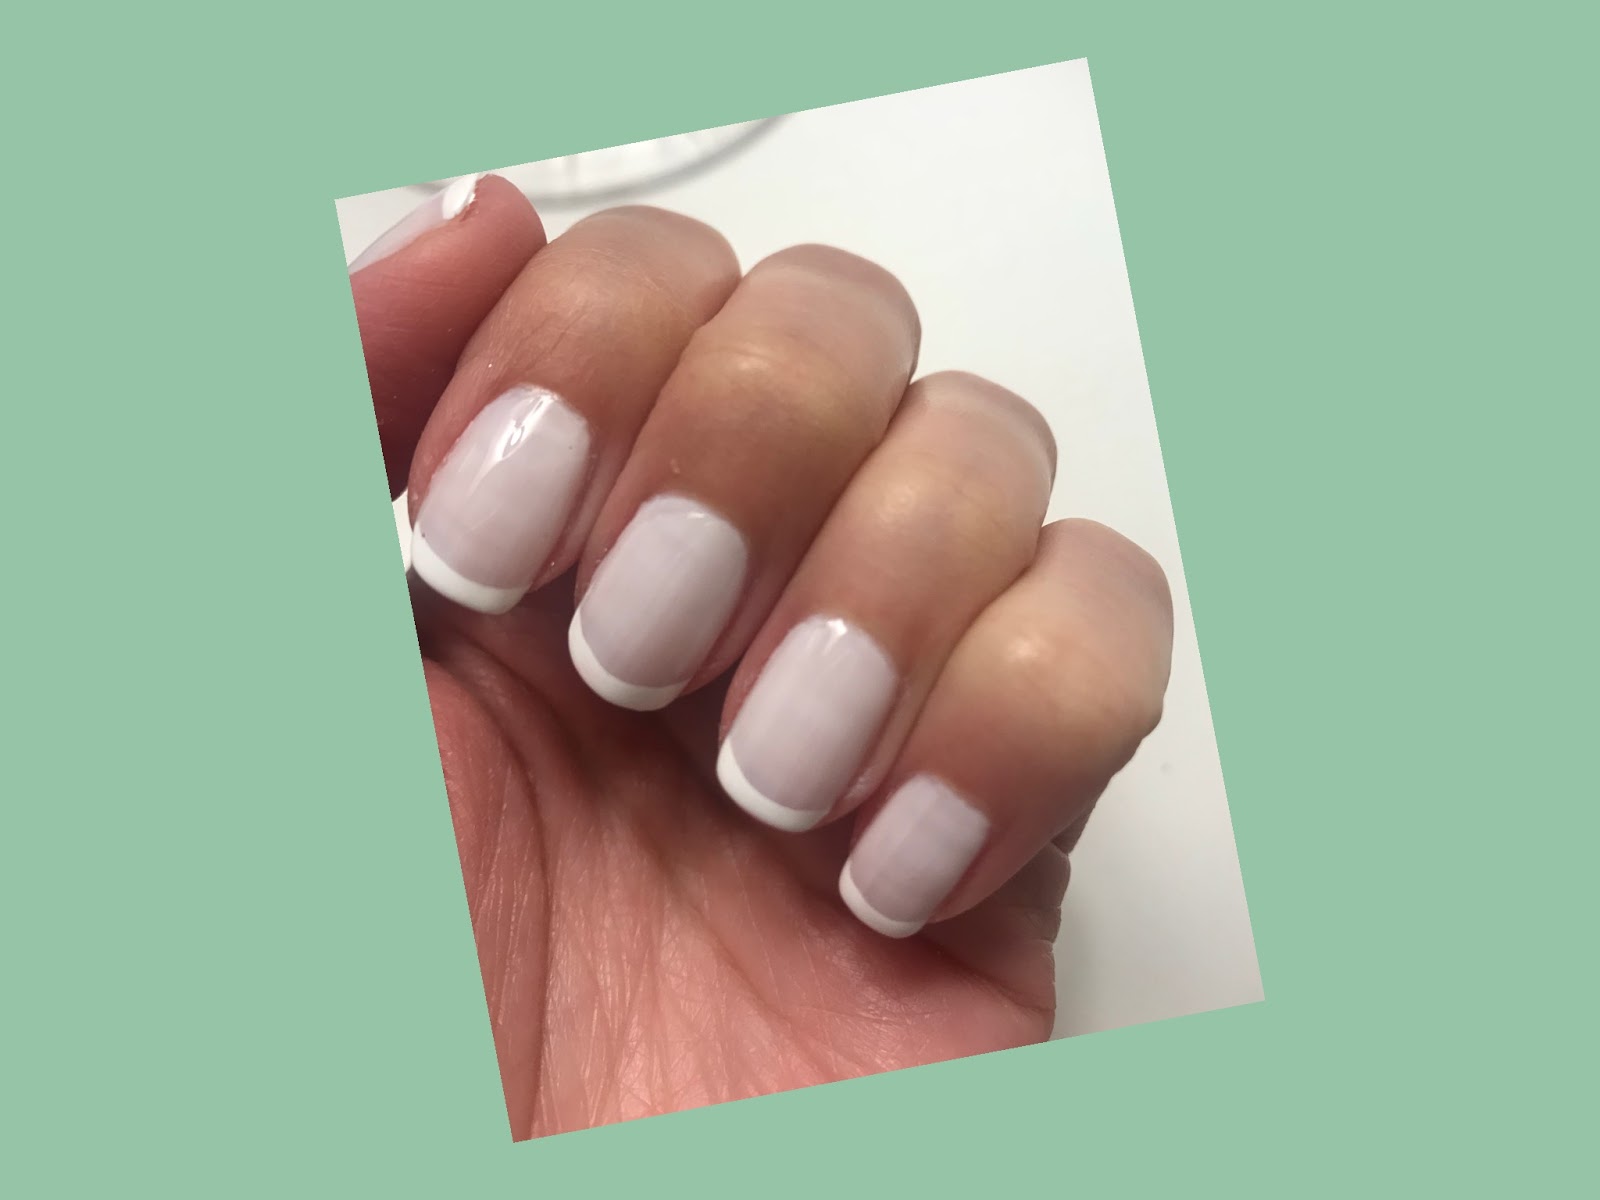 Classic and Clean: Plain Nail Polish Looks - wide 7